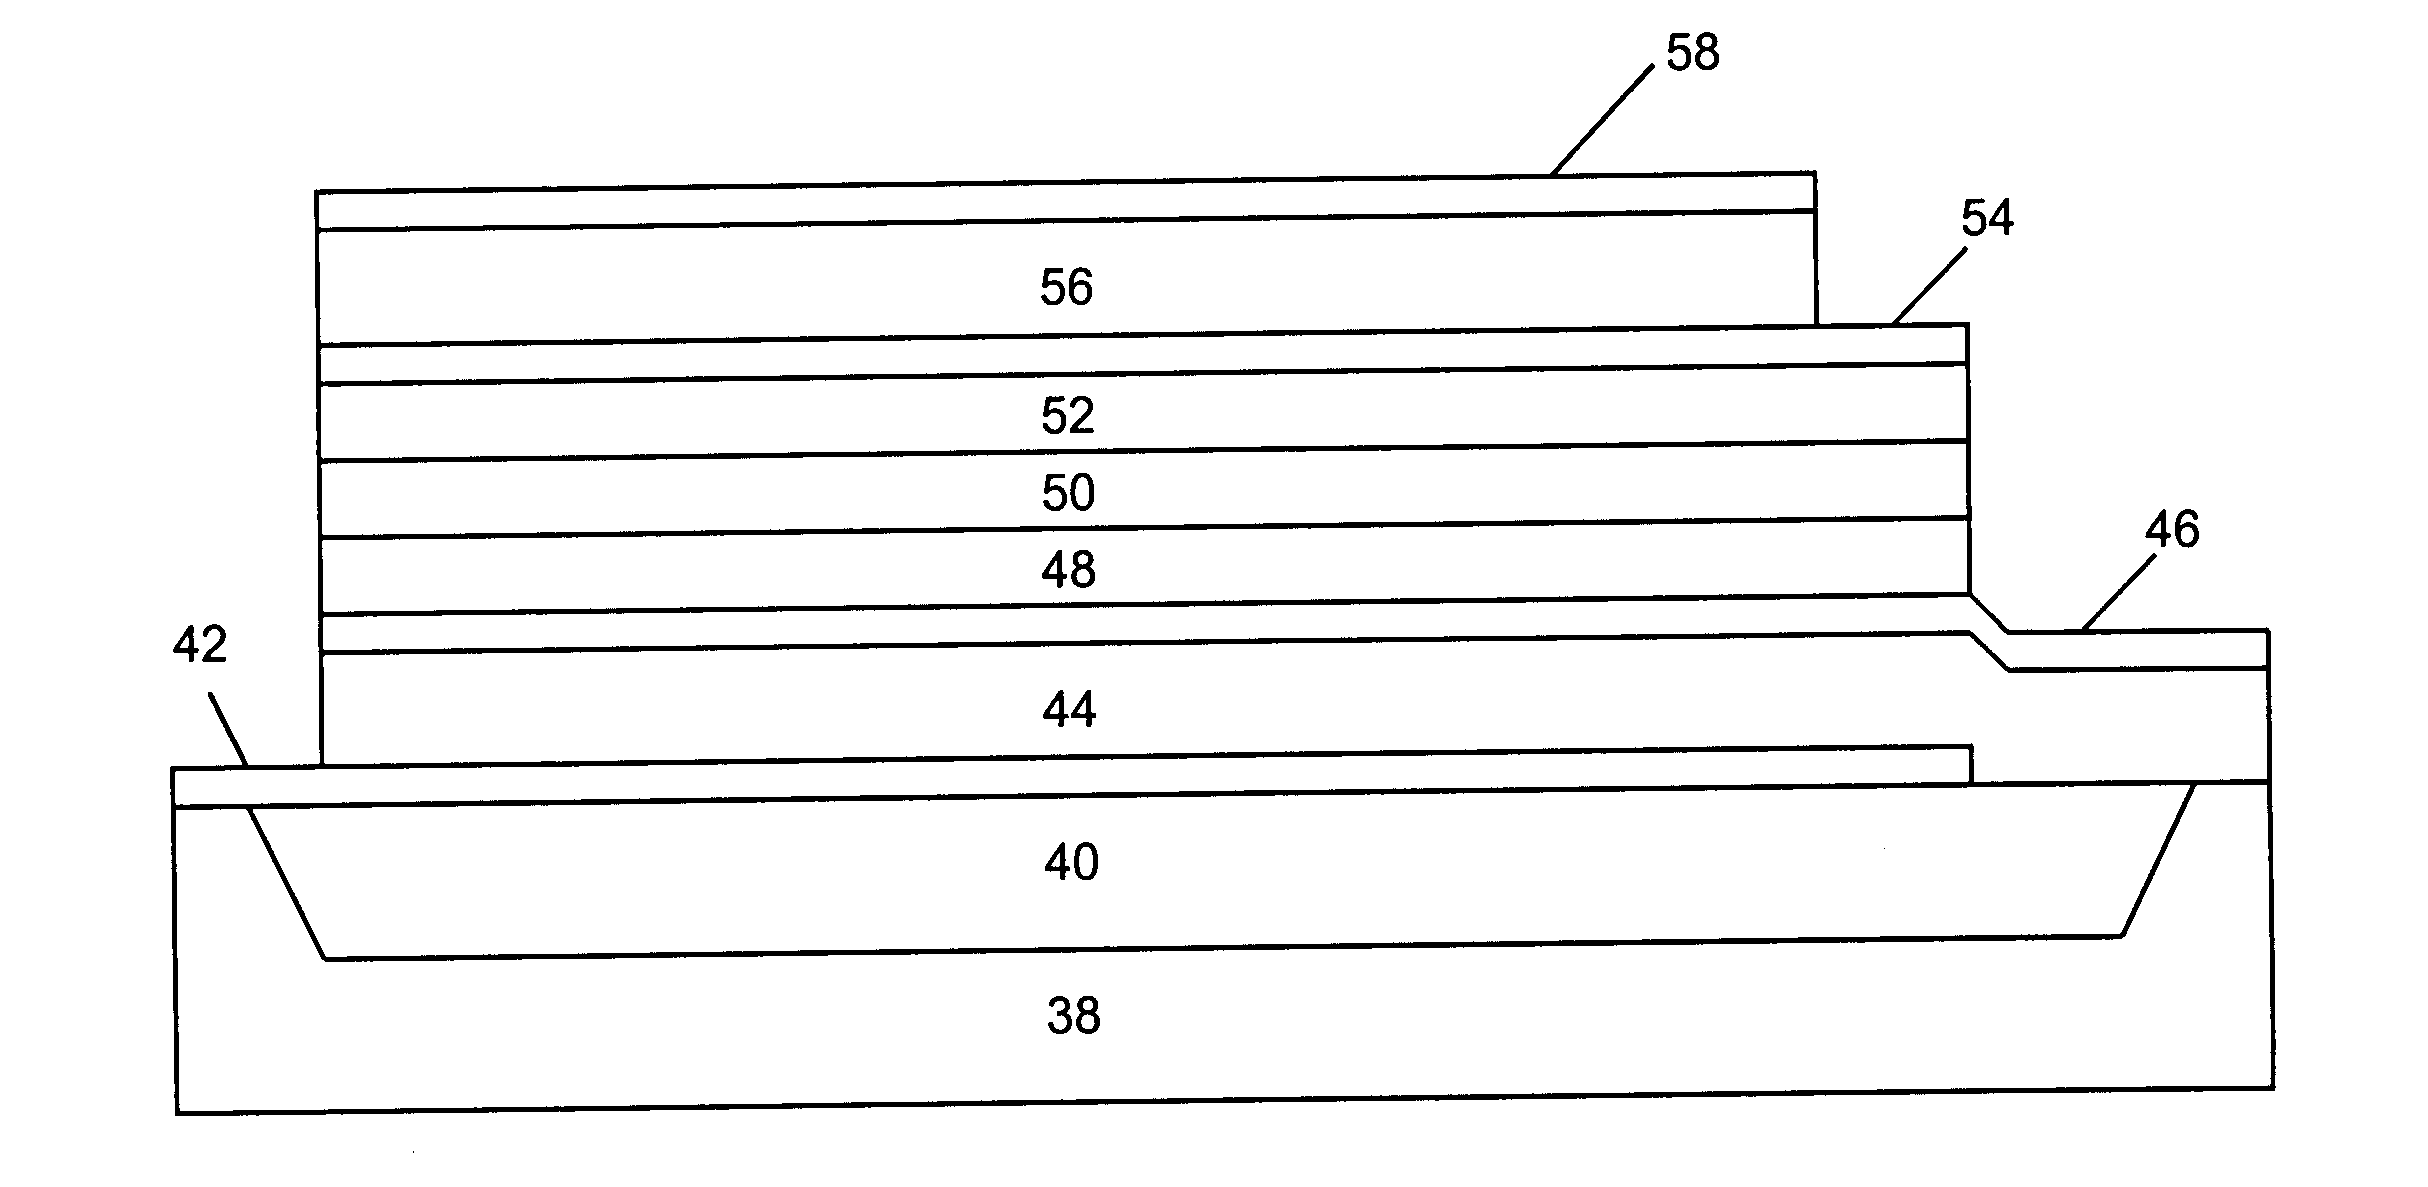 Titanium-tungsten alloy based mirrors and electrodes in bulk acoustic wave devices